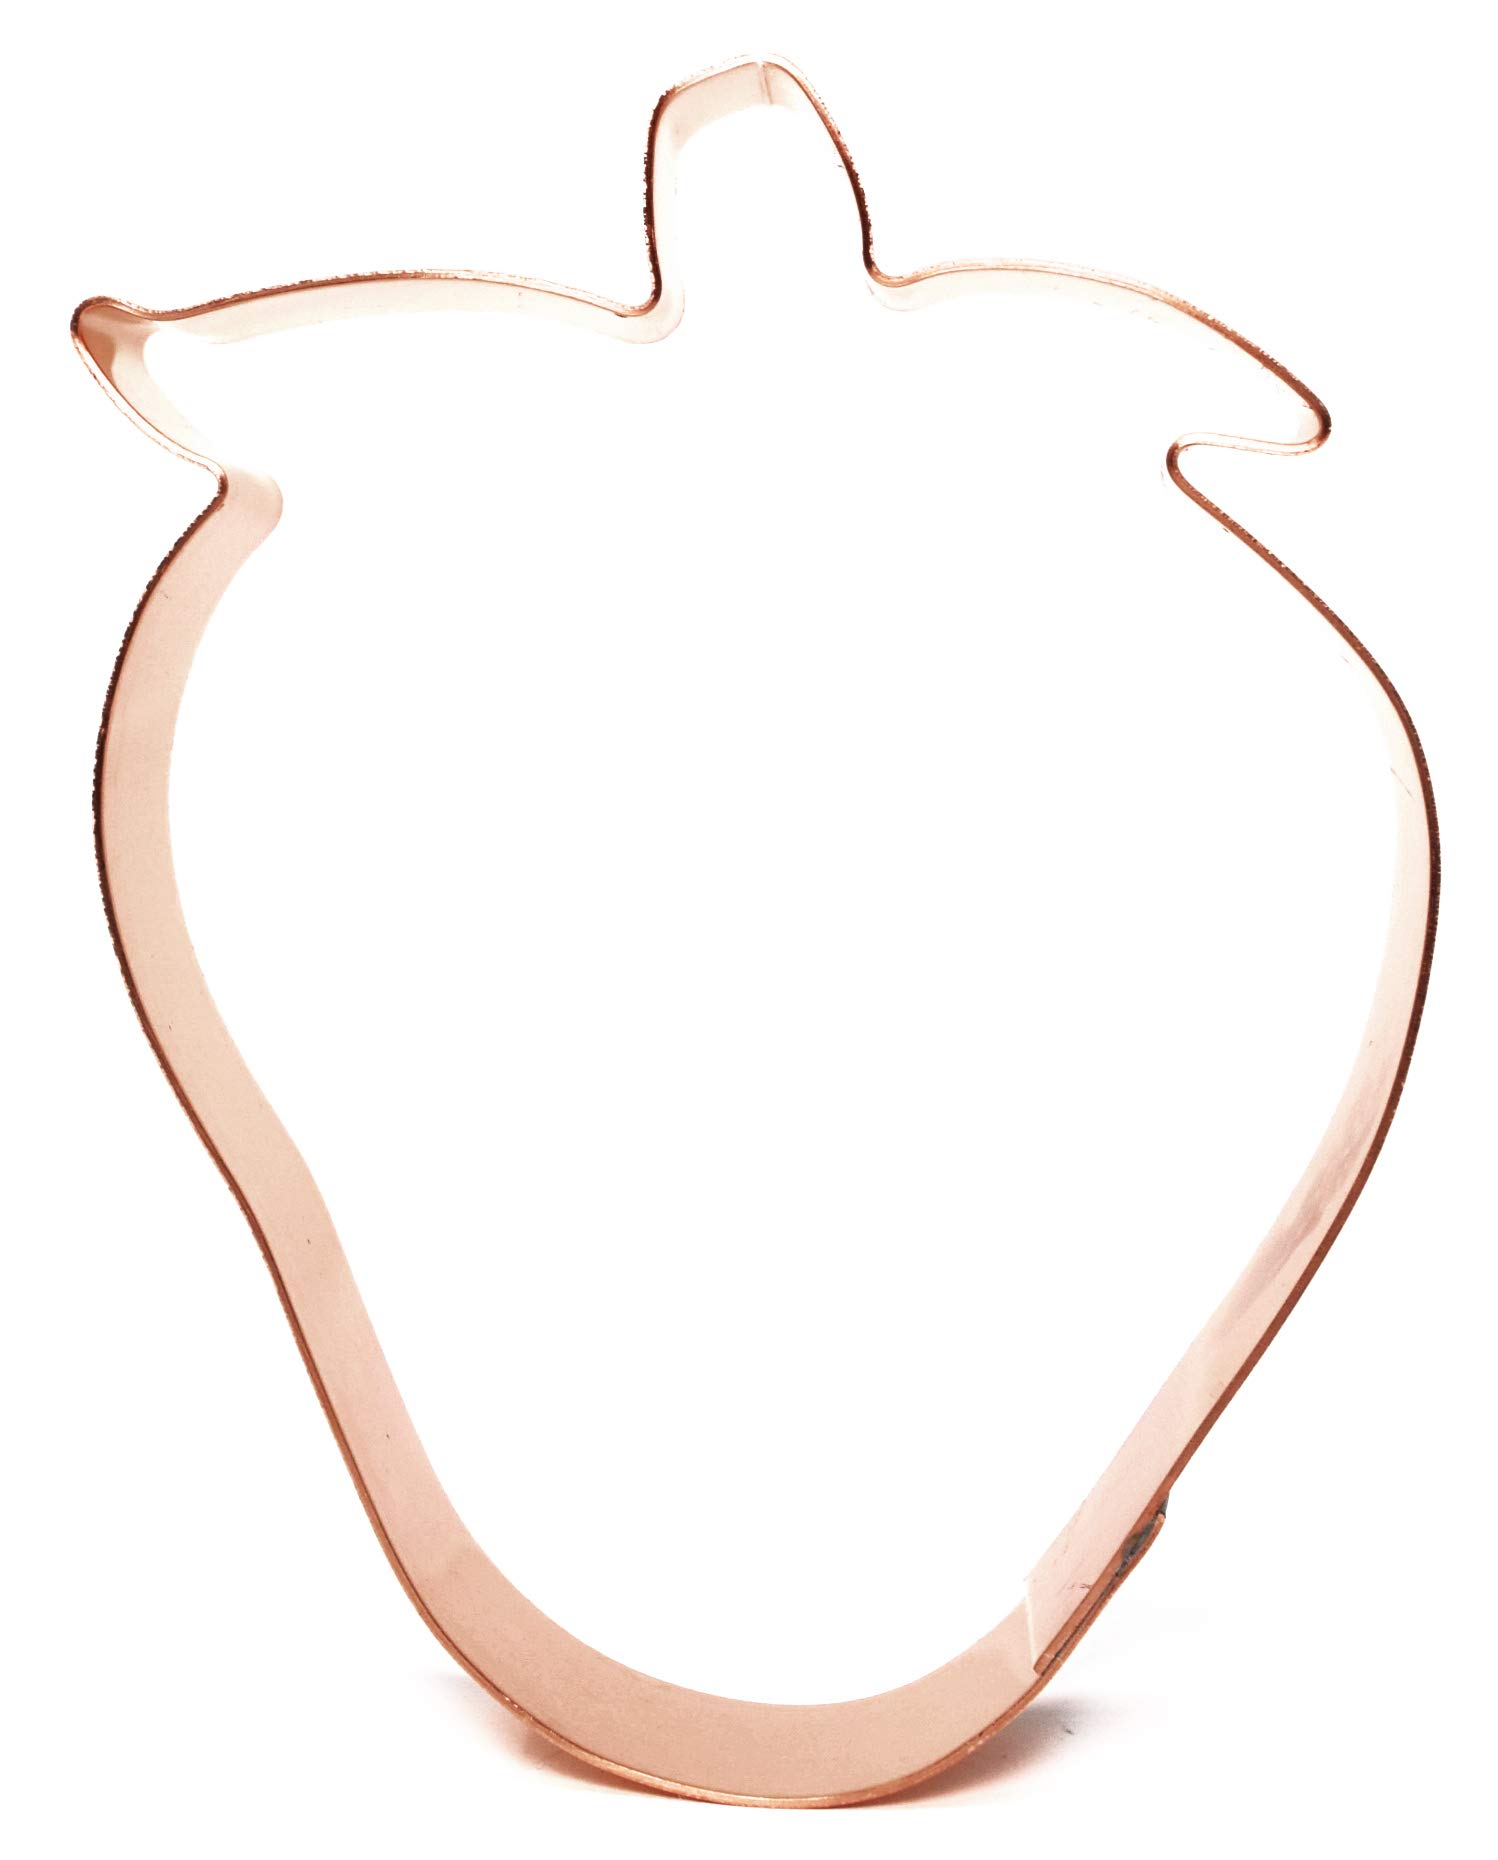 4 Inch Strawberry Fruit Copper Cookie Cutter